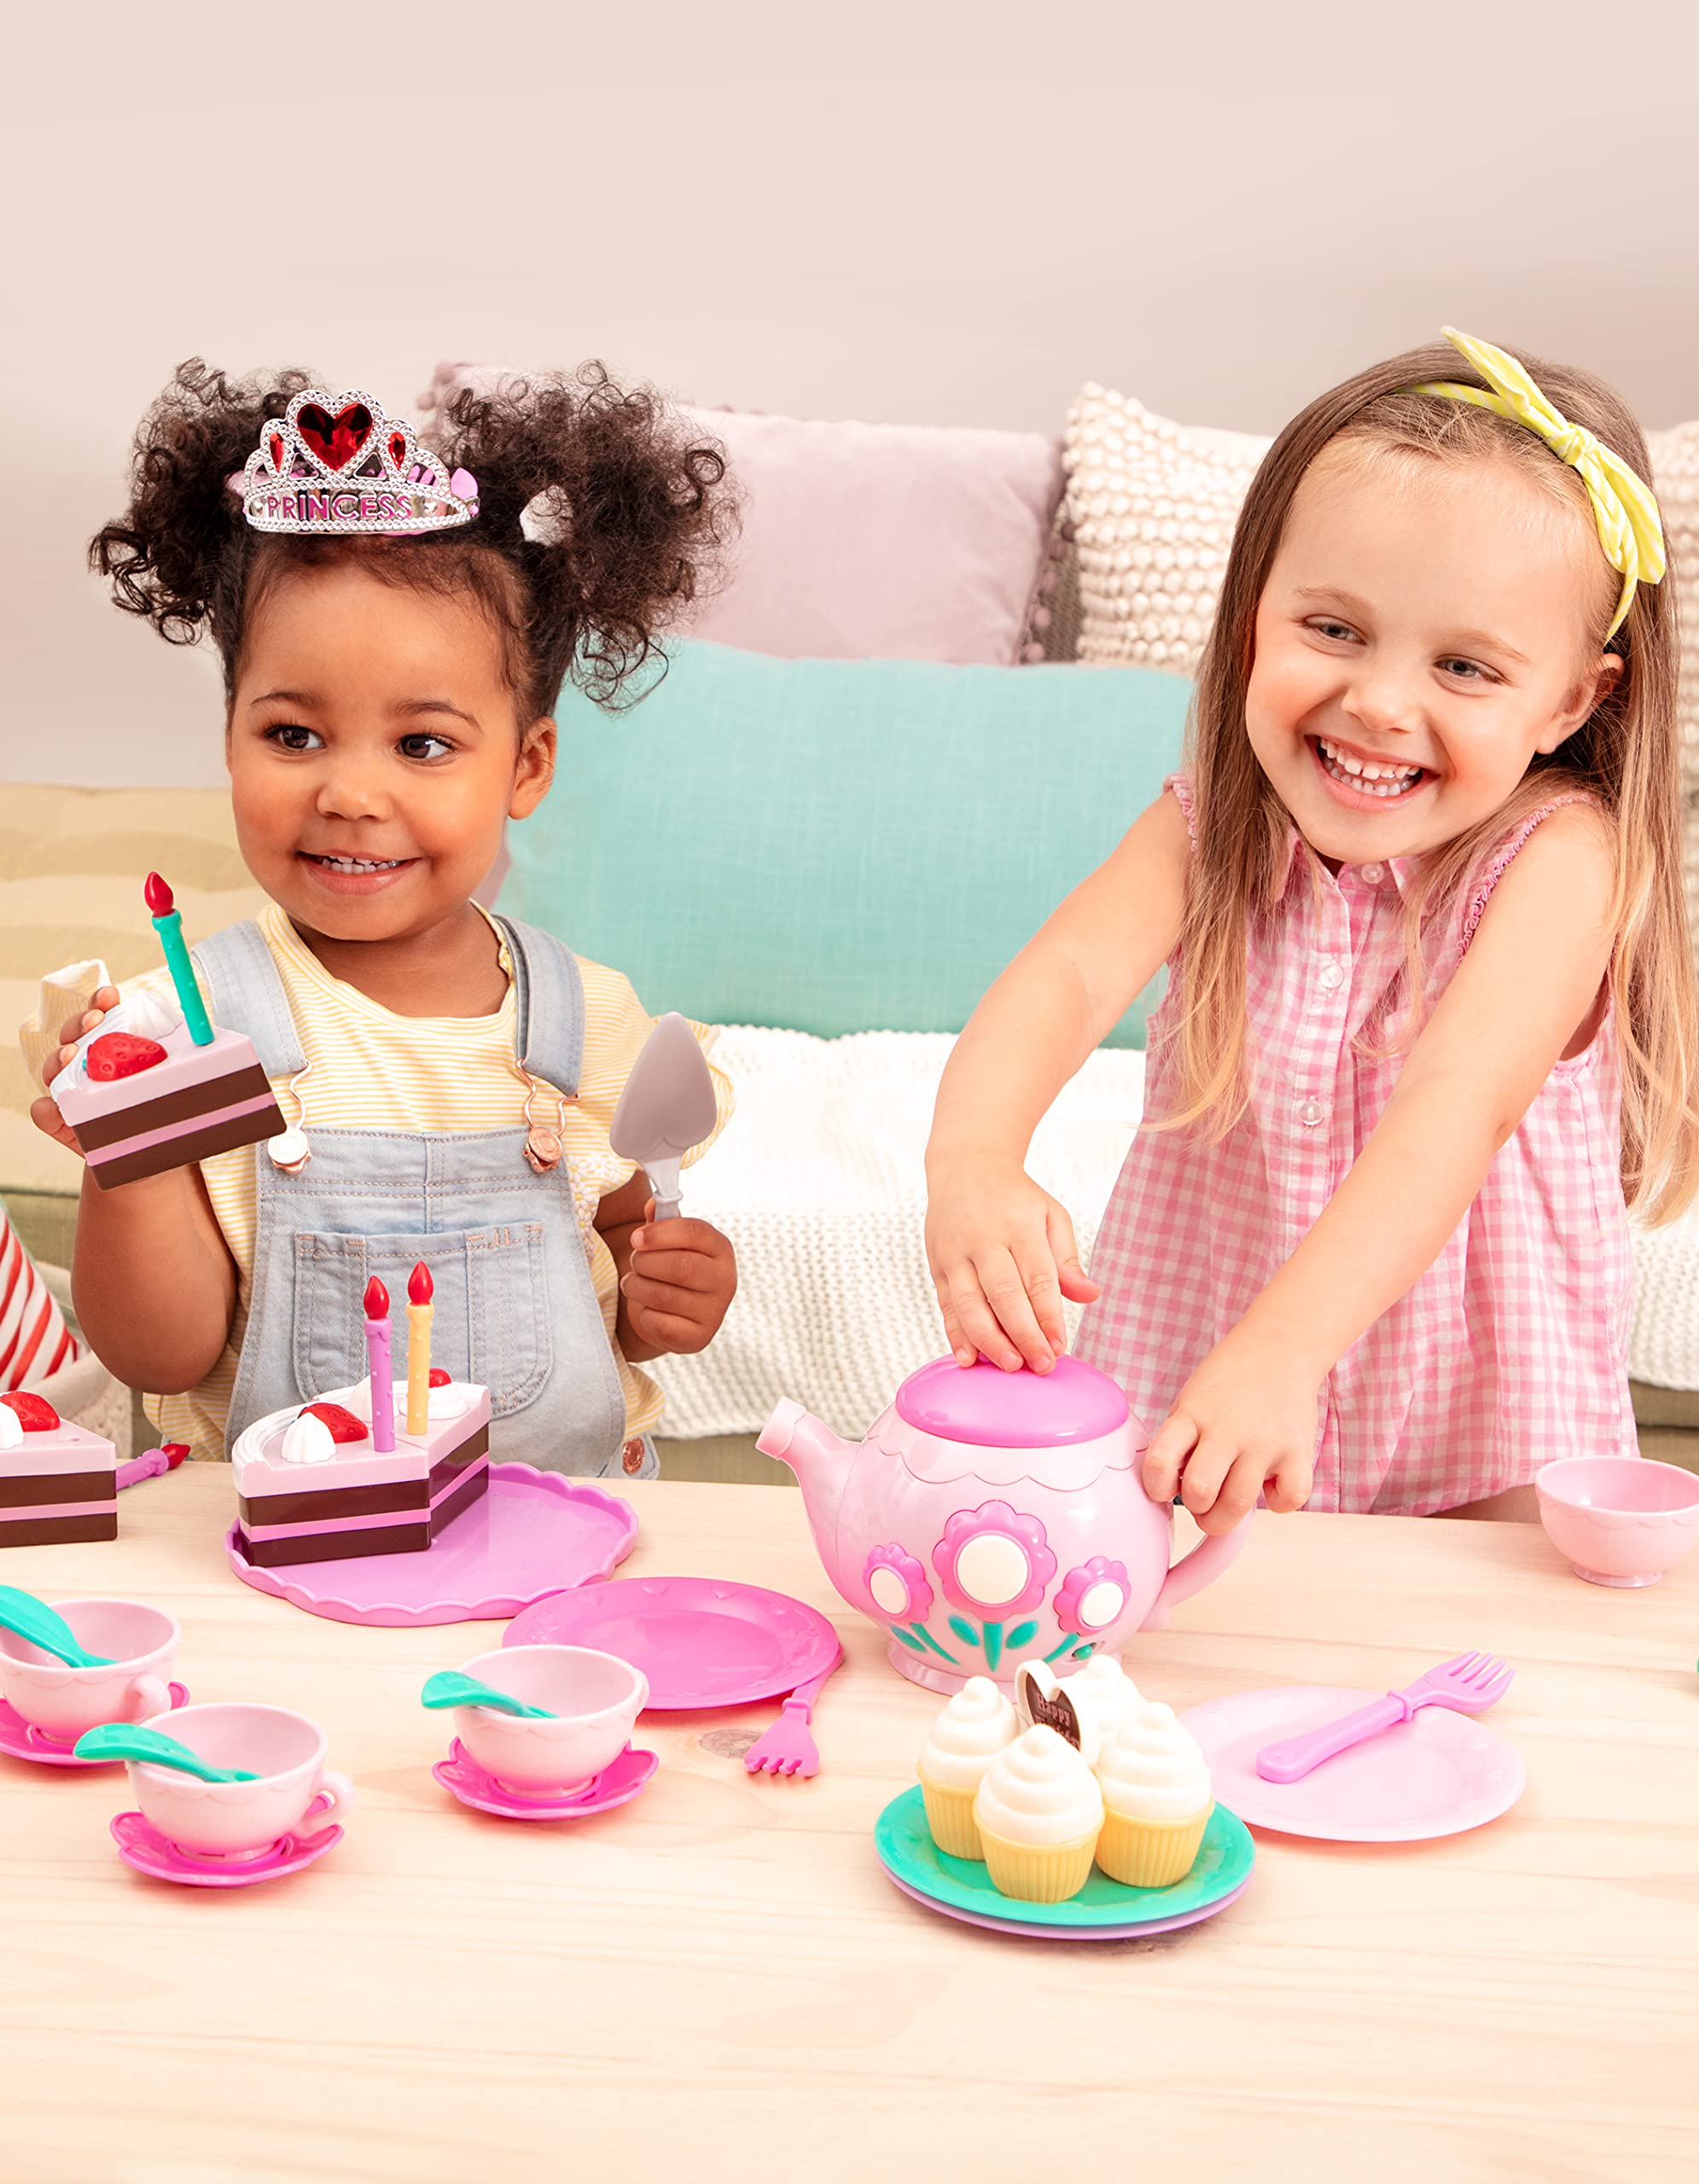 Play Circle – Birthday Cake – Toy Food – Plates & Candles Accessories – Pretend Play – Ages 3 Years Old & Up – Princess Birthday Party